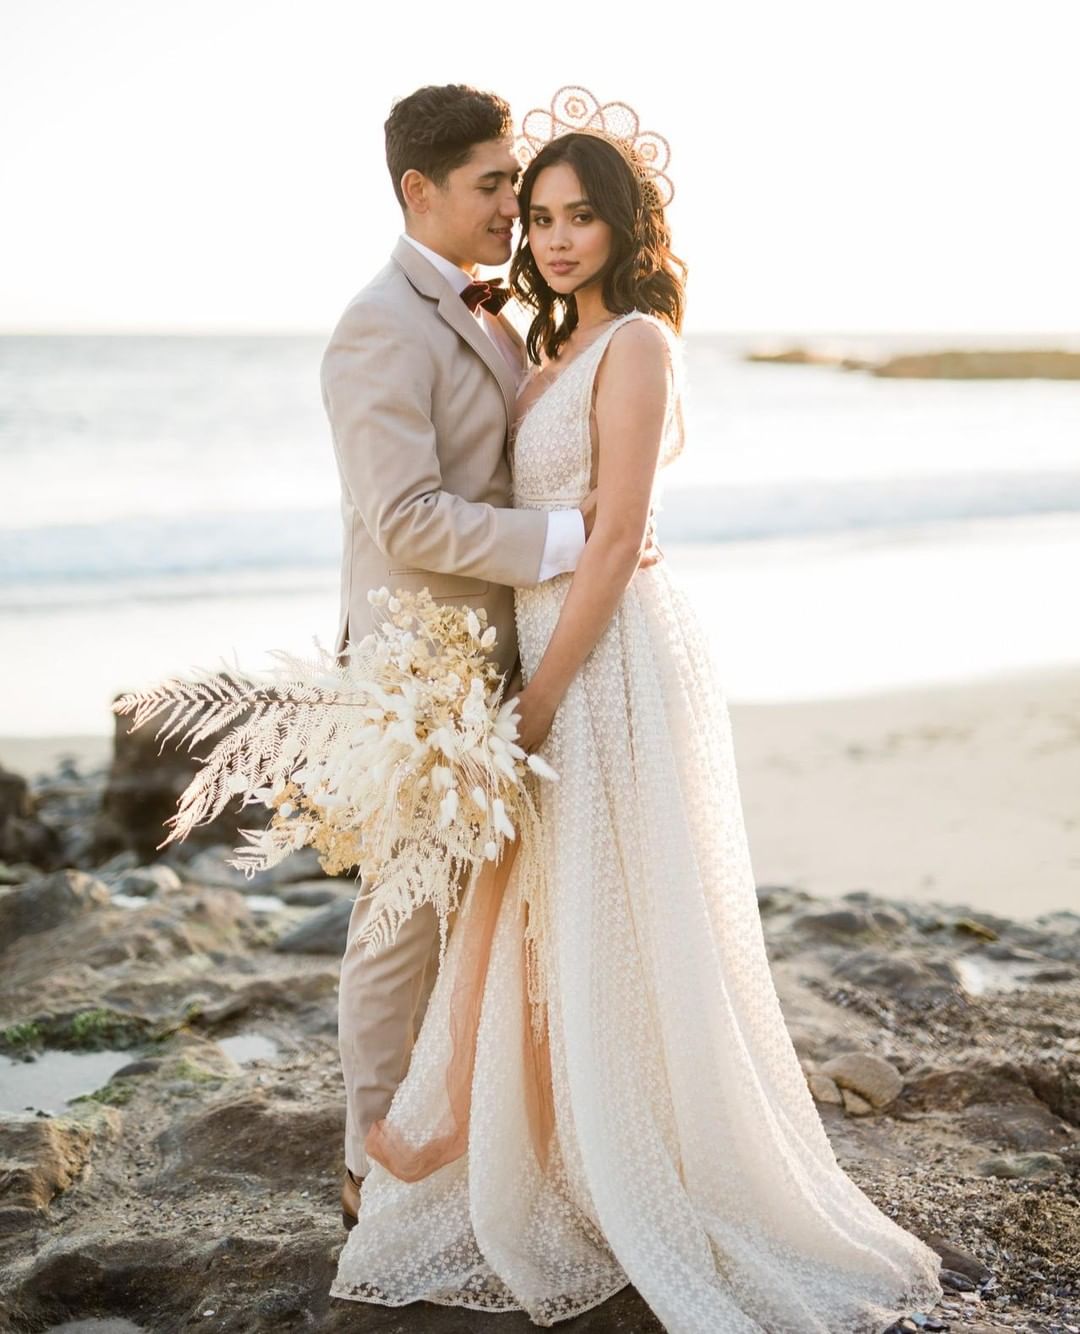 Matching Groom Attire With Your Gown and Wedding Style ⋆ Ruffled